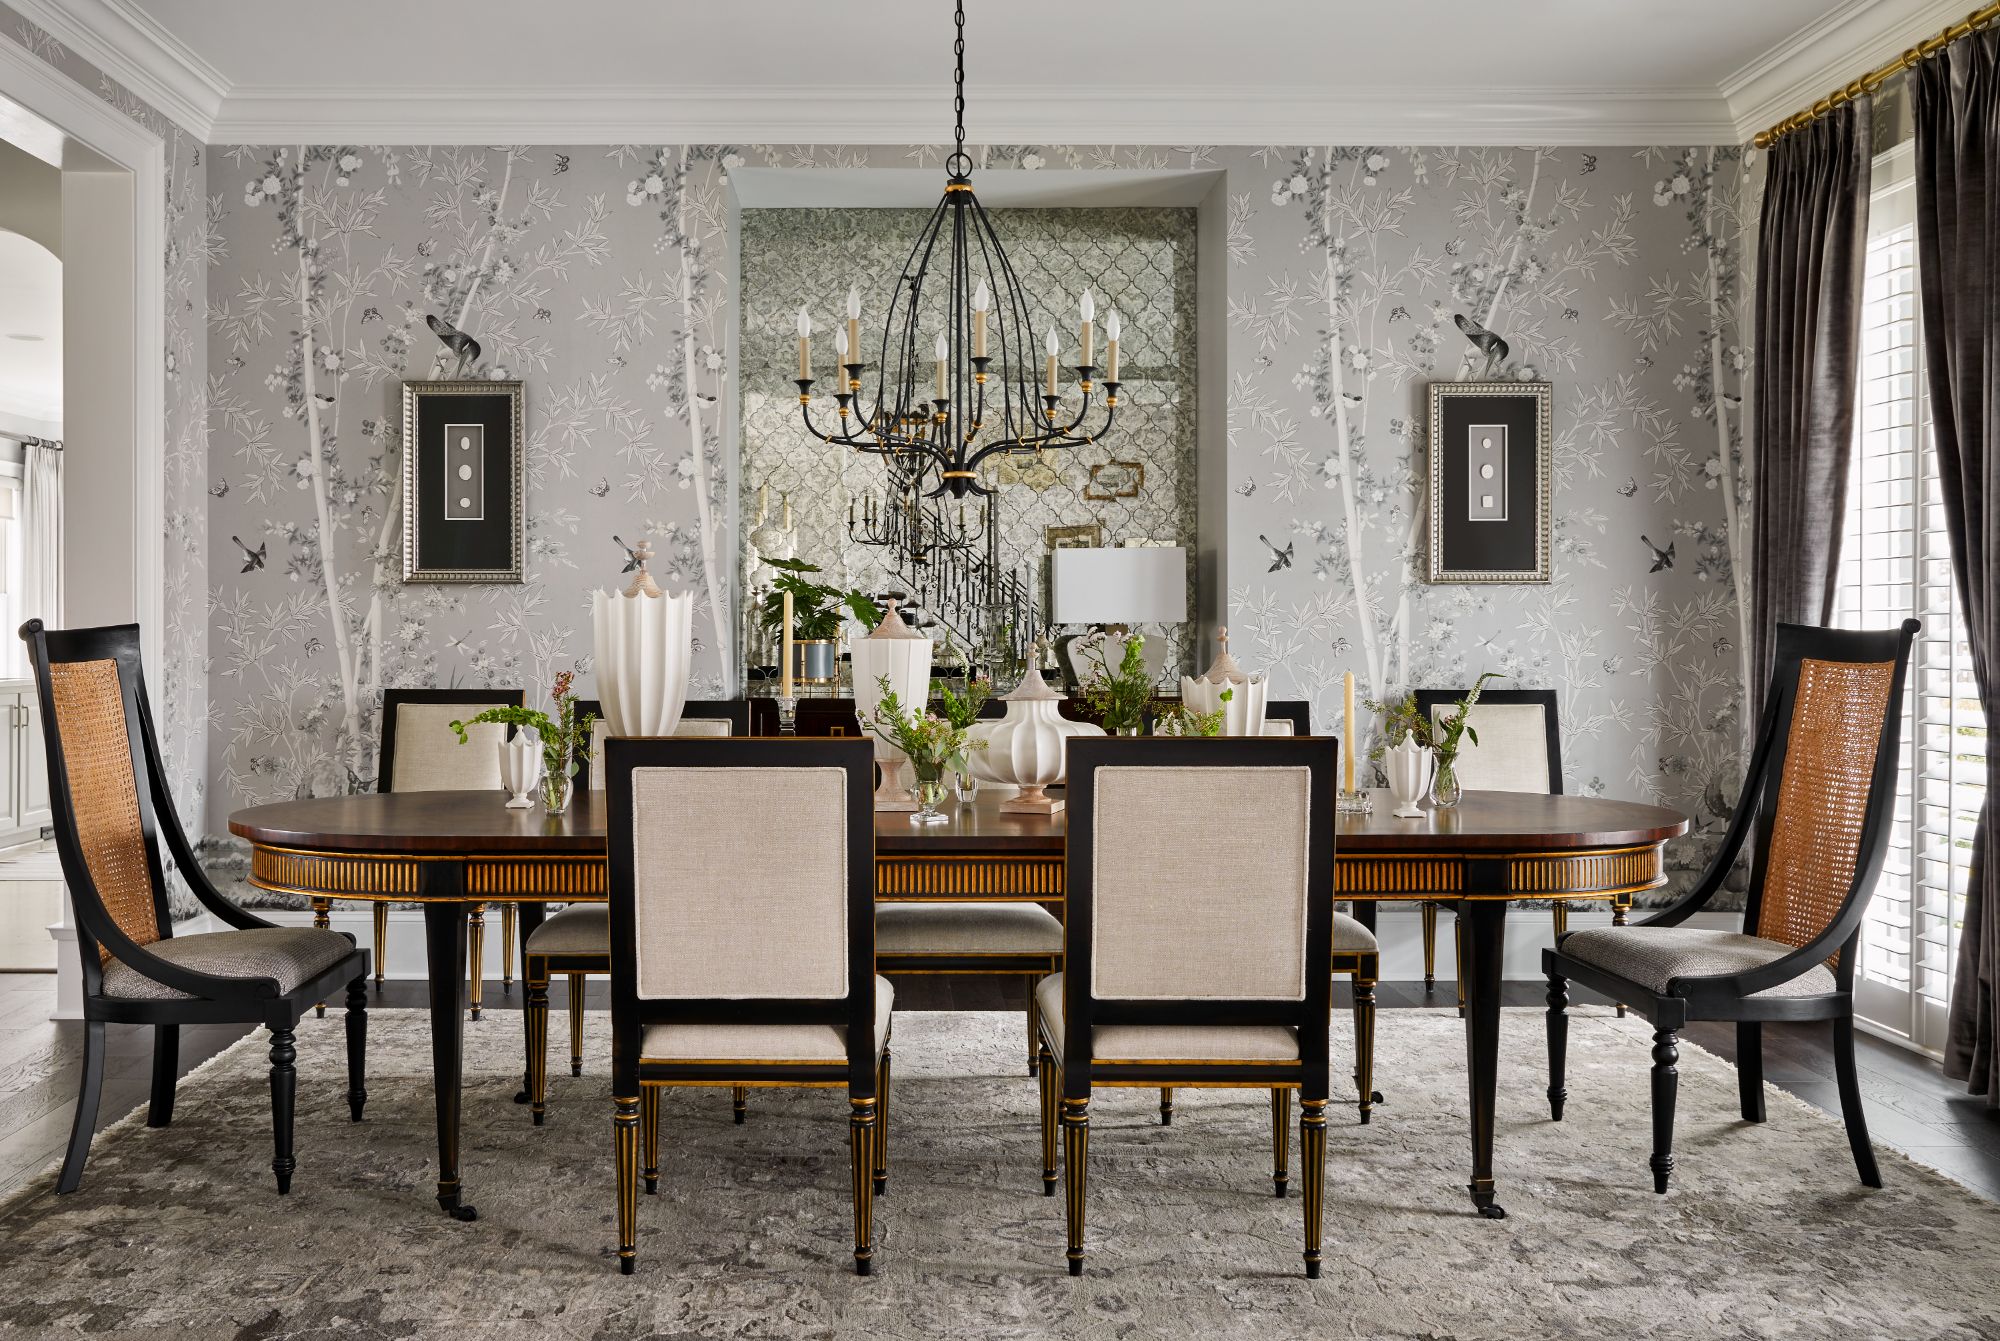 Add more seating to your dining room